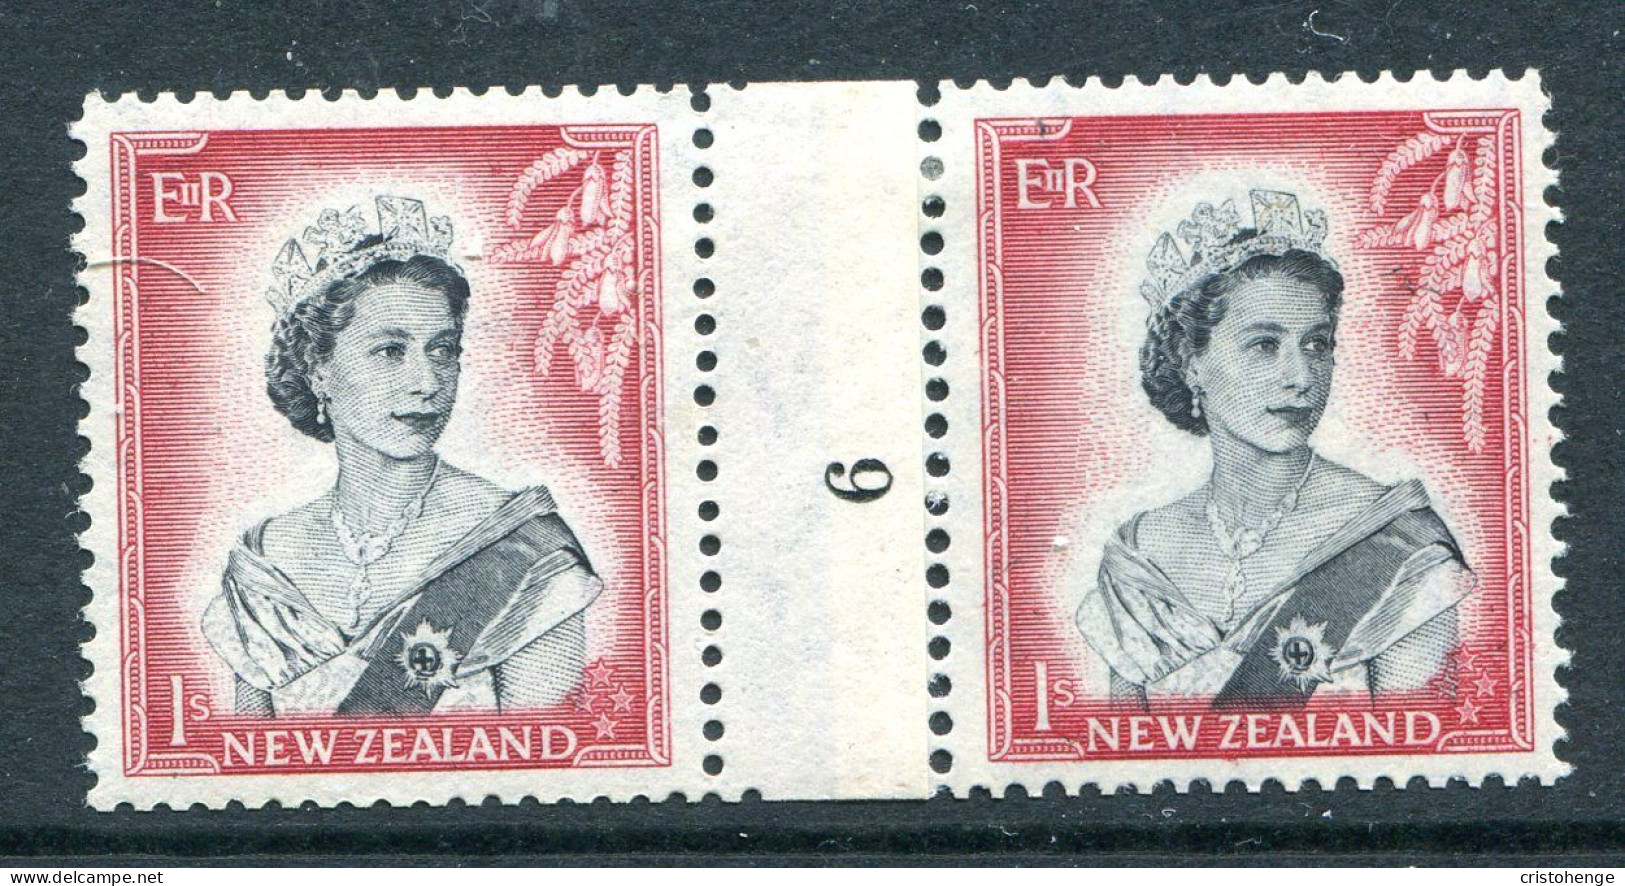 New Zealand 1953-59 QEII Definitives - Coil Pairs - 1/- Black & Carmine - Horizontal - No. 6 - LHM - Unused Stamps